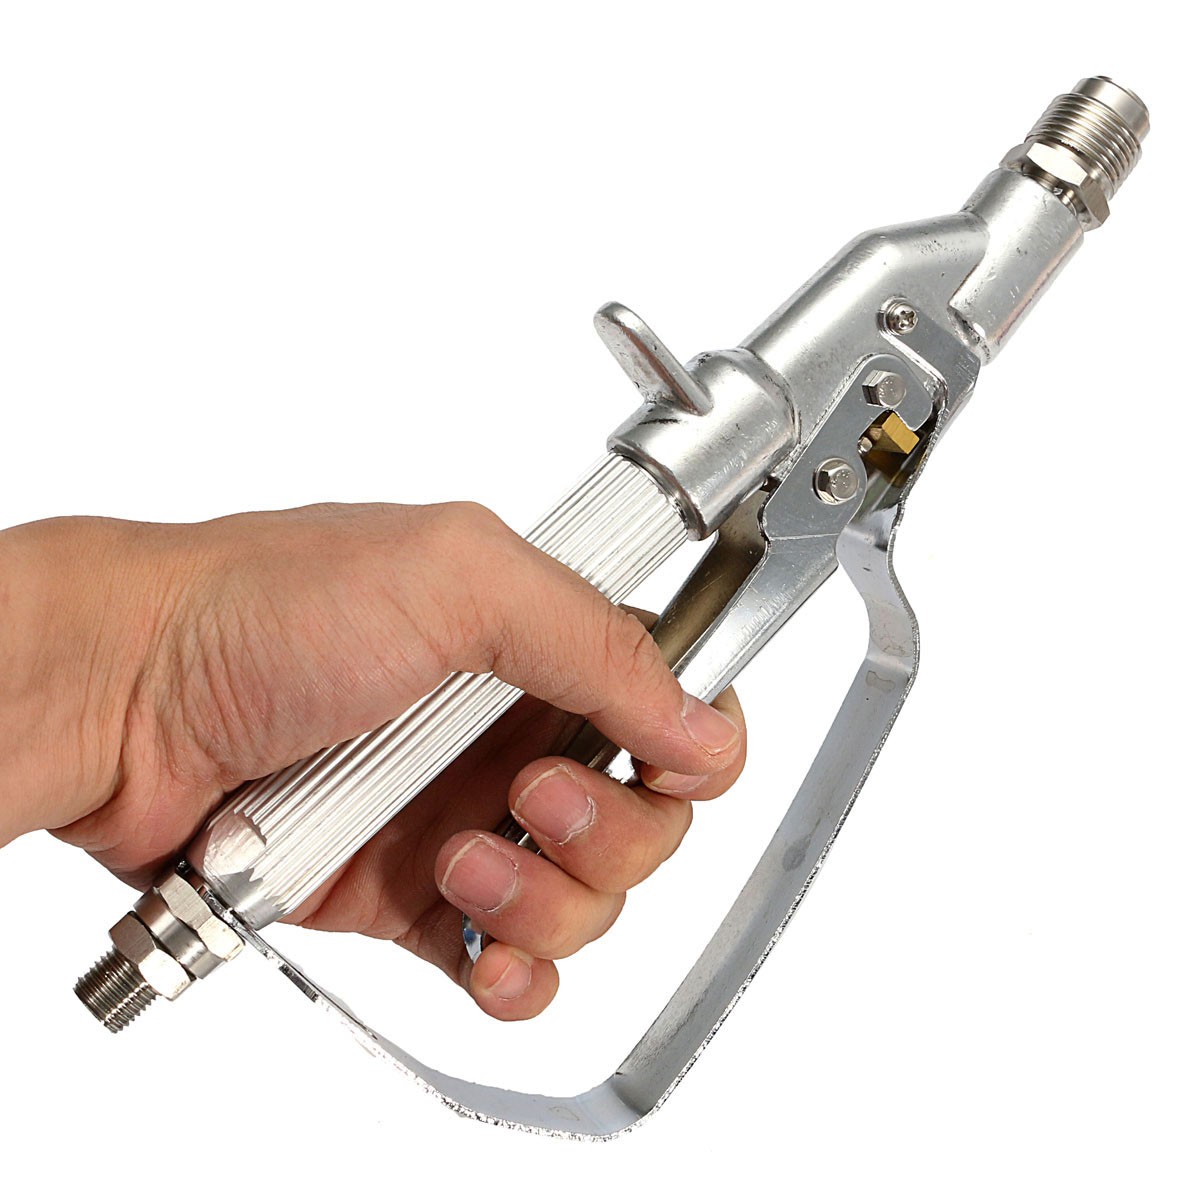 

3600PSI High Pressure Tip Guard Tip Aftermarket Airless Paint Spray Gun with 517 Tip